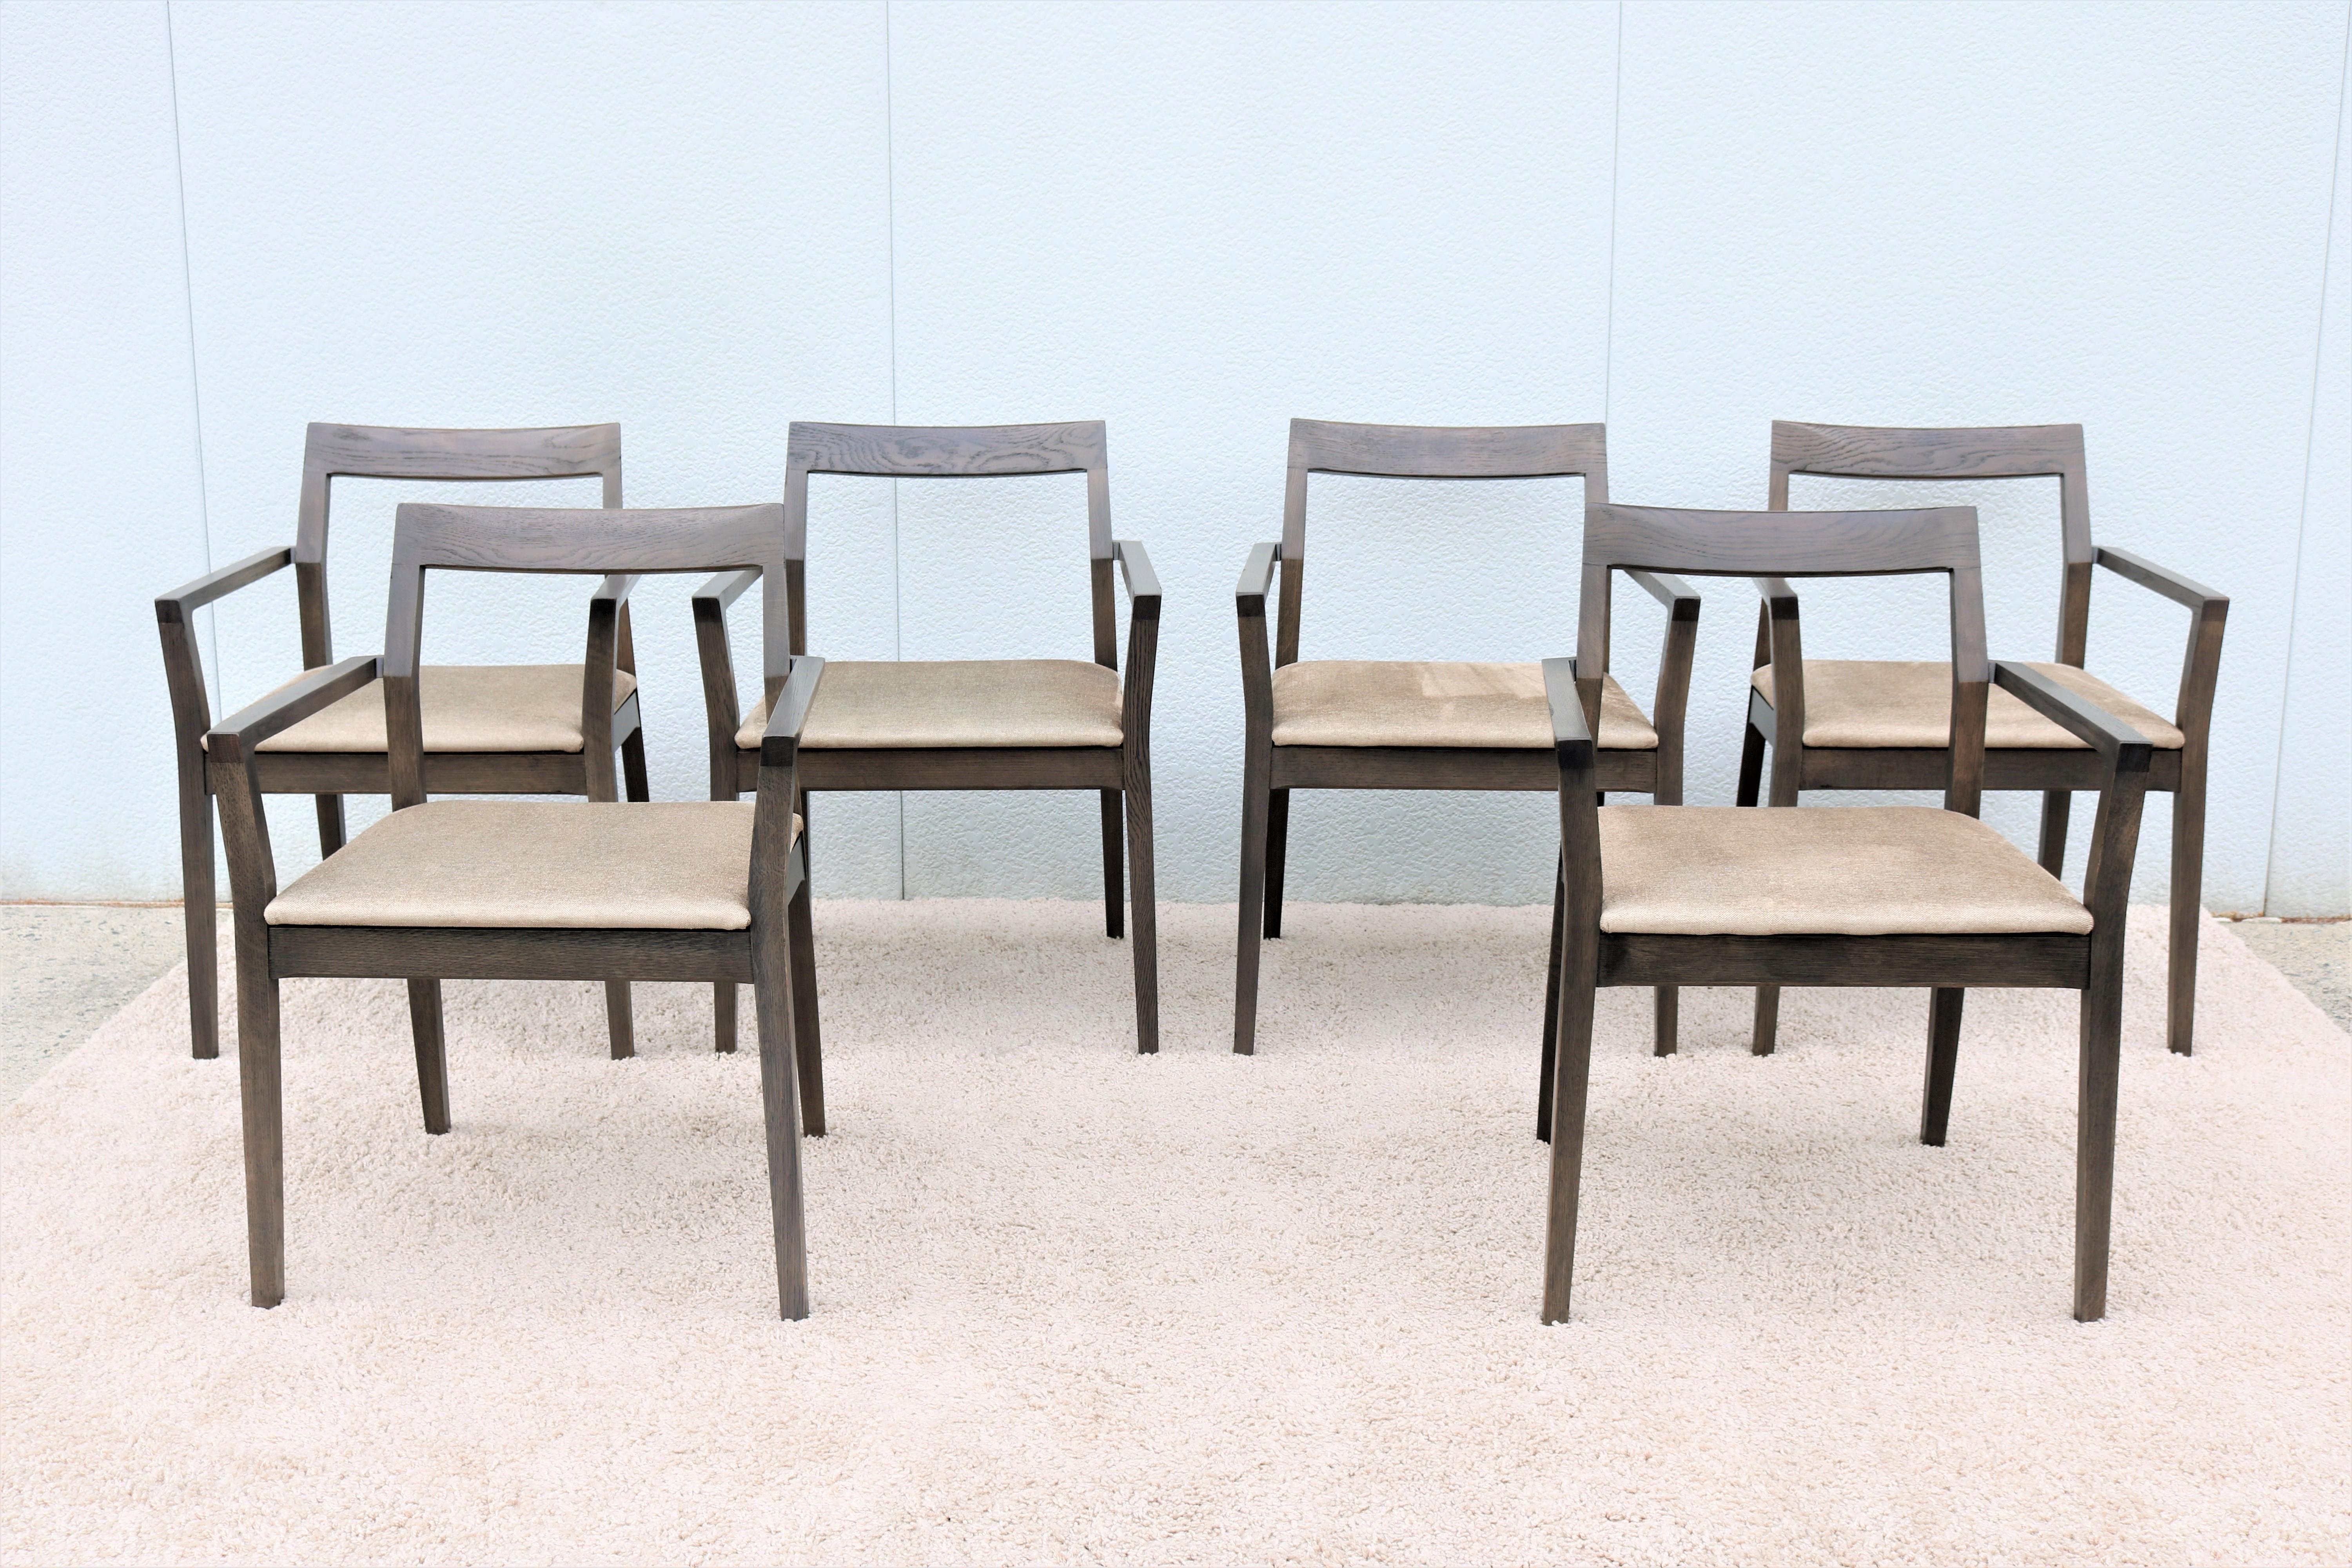 The Krusin wood dining or side chair is contemporary and very comfortable.
Well-constructed frame and steam bent top rail with light and graceful clean lines that are engaging from every angle.
Great for home dining room or guest reception areas